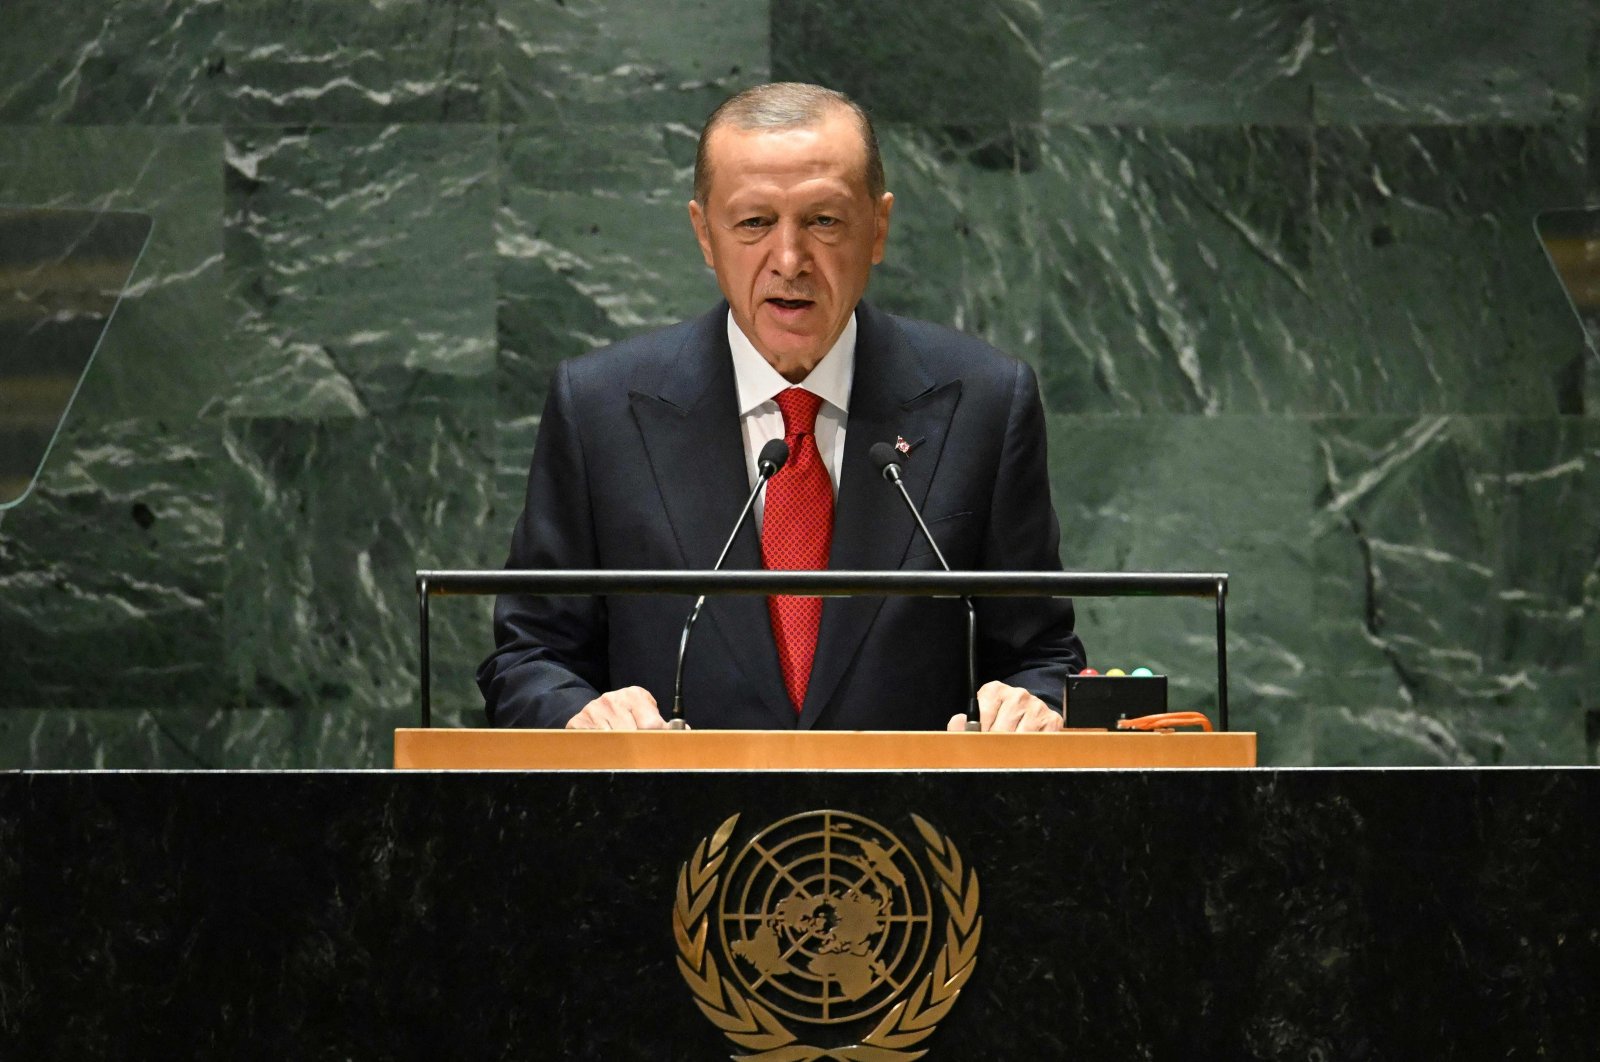 President Recep Tayyip Erdoğan addresses the 78th United Nations General Assembly at UN headquarters in New York City on Sept. 19, 2023. (AFP Photo)